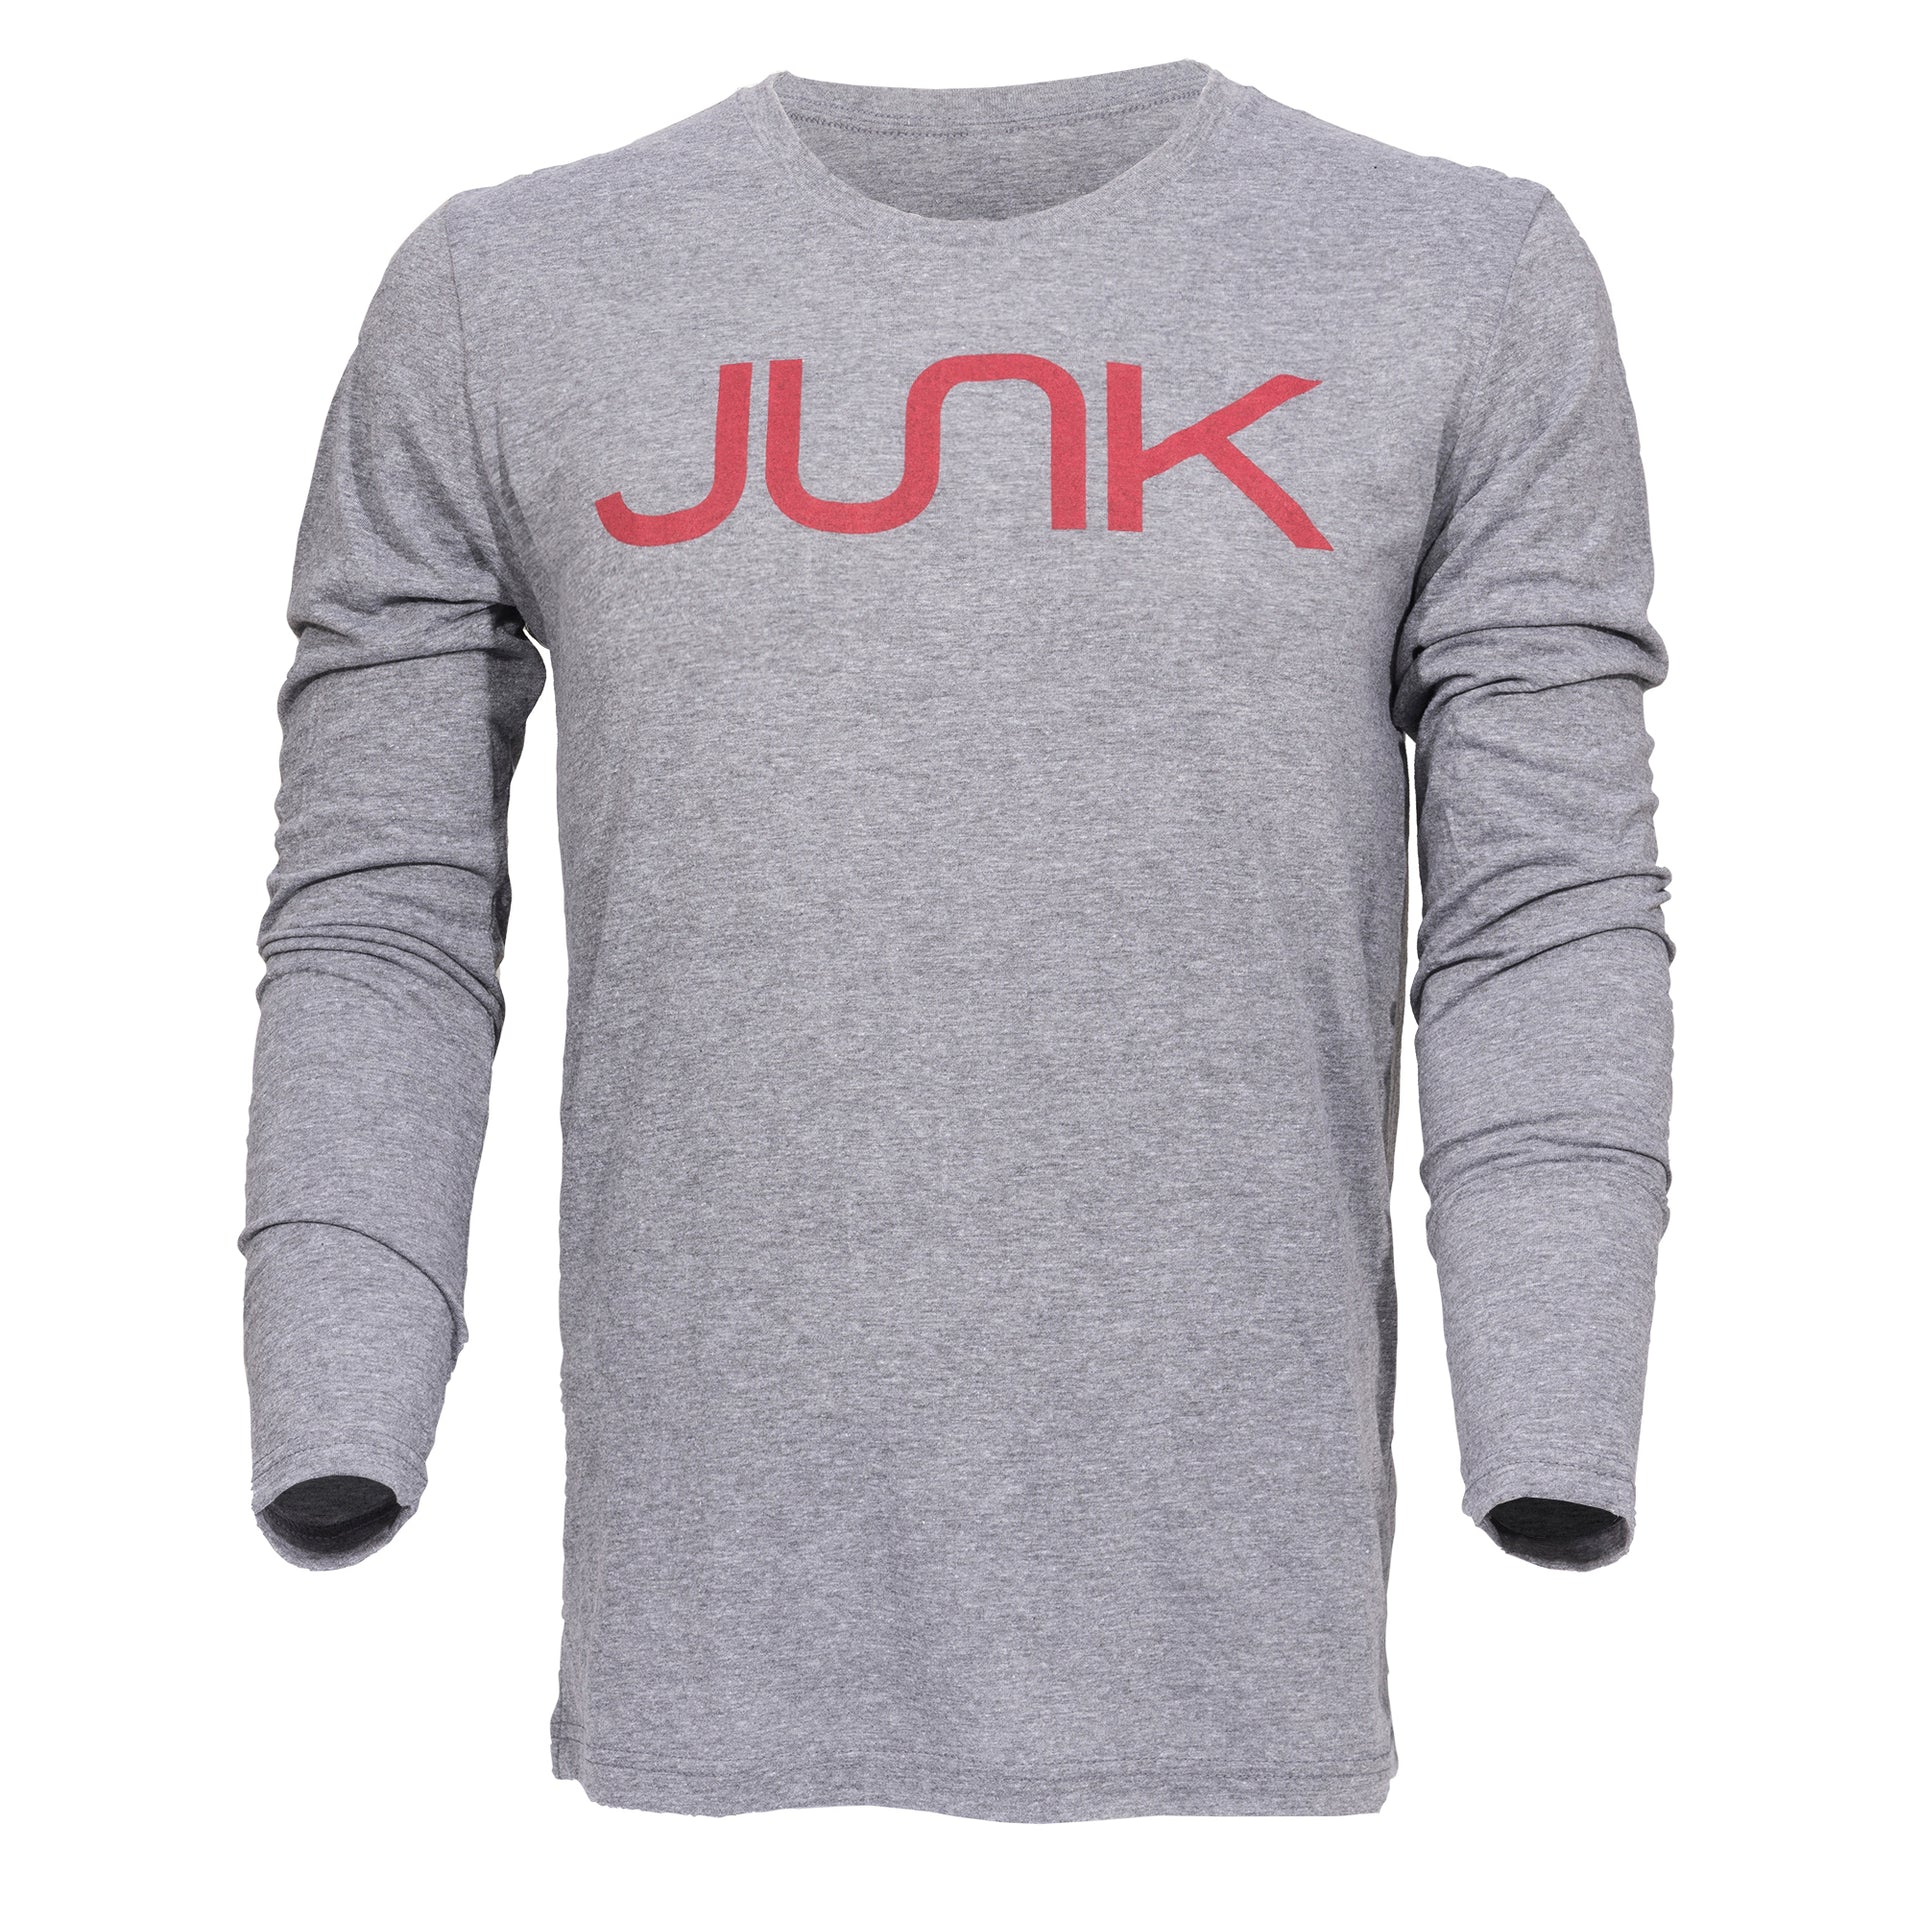 JUNK Heather Gray Long Sleeve - View 1